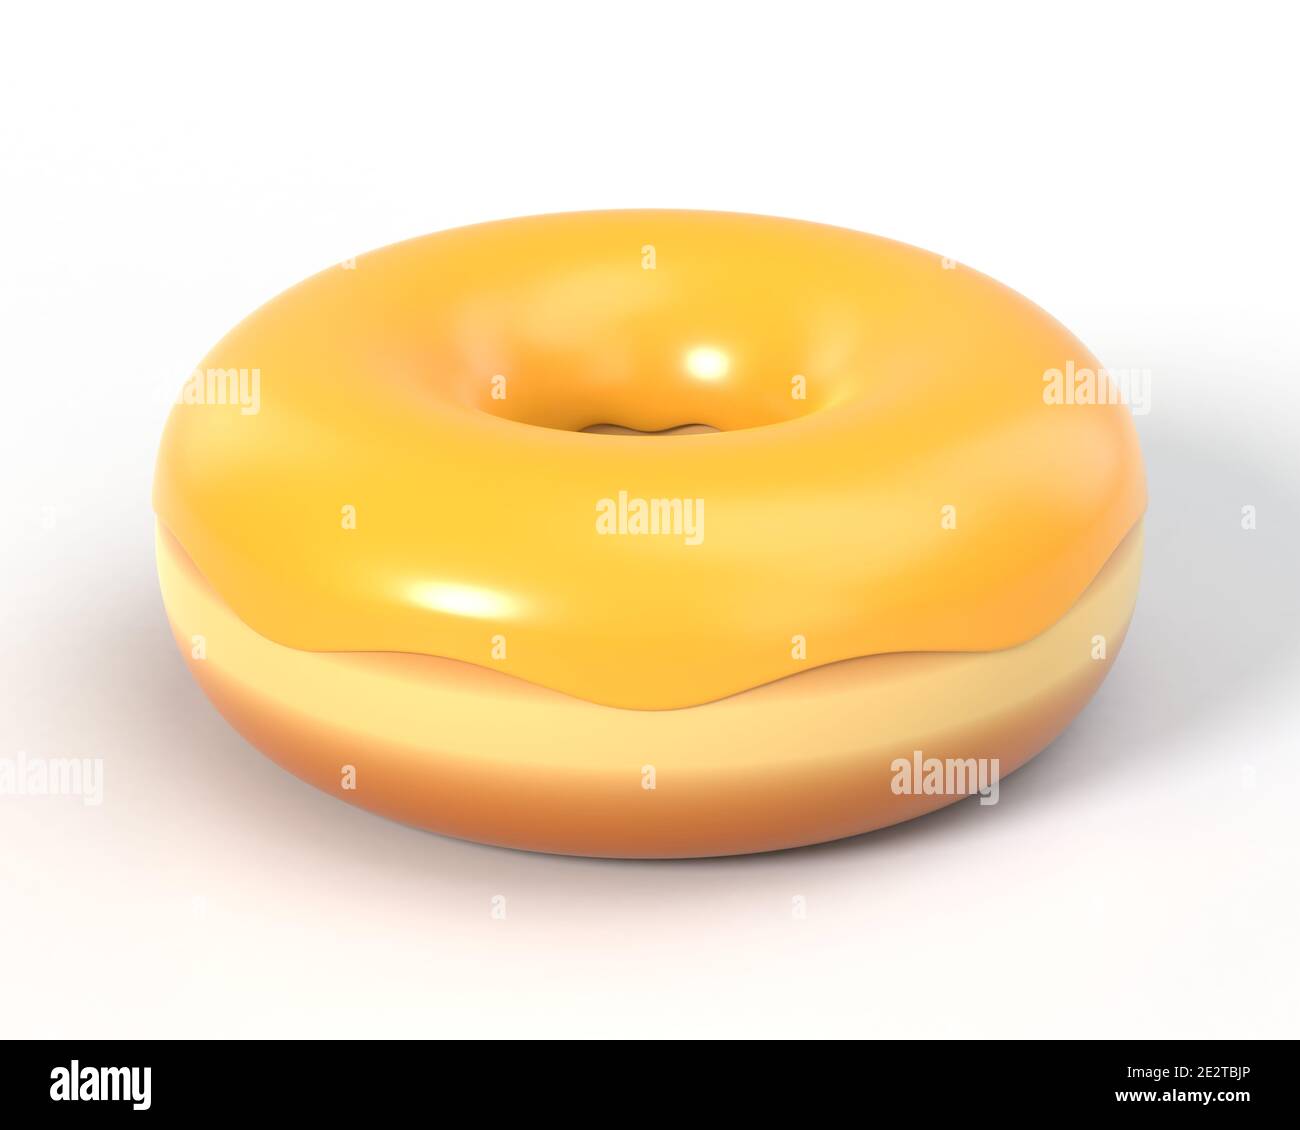 Delicious colorful donut with shiny sweet icing. Macro view of american dessert on white background. Graphic design element for bakery flyer, poster, Stock Photo